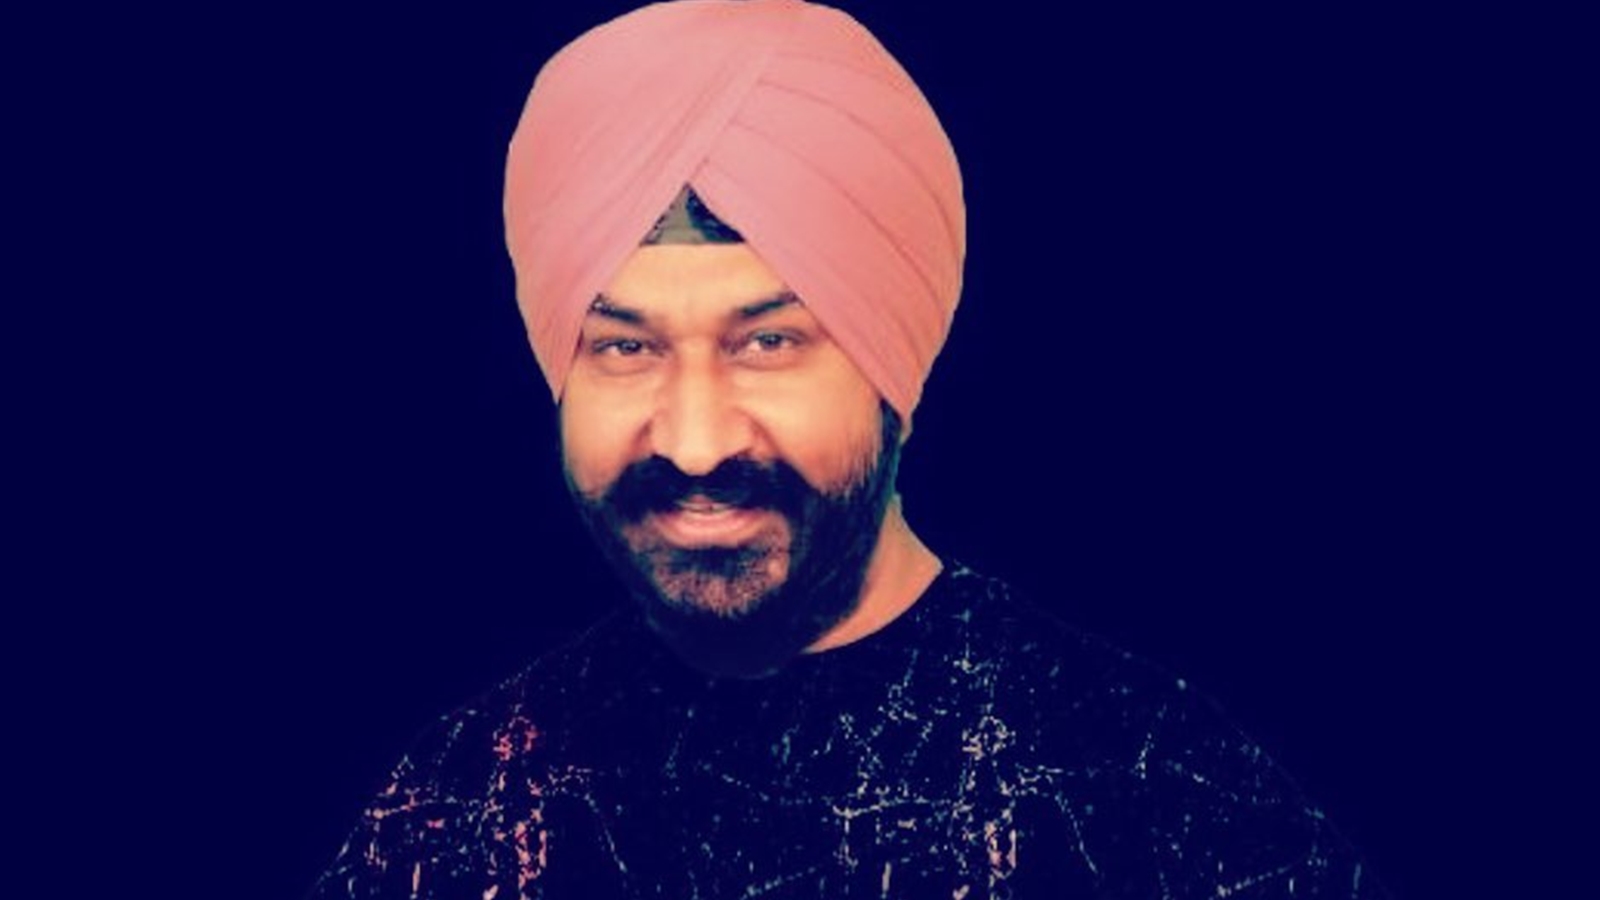 android, gurucharan singh missing case: actor’s father voices concern over lack of substantial information: ‘hum sab bahut pareshaan hain’